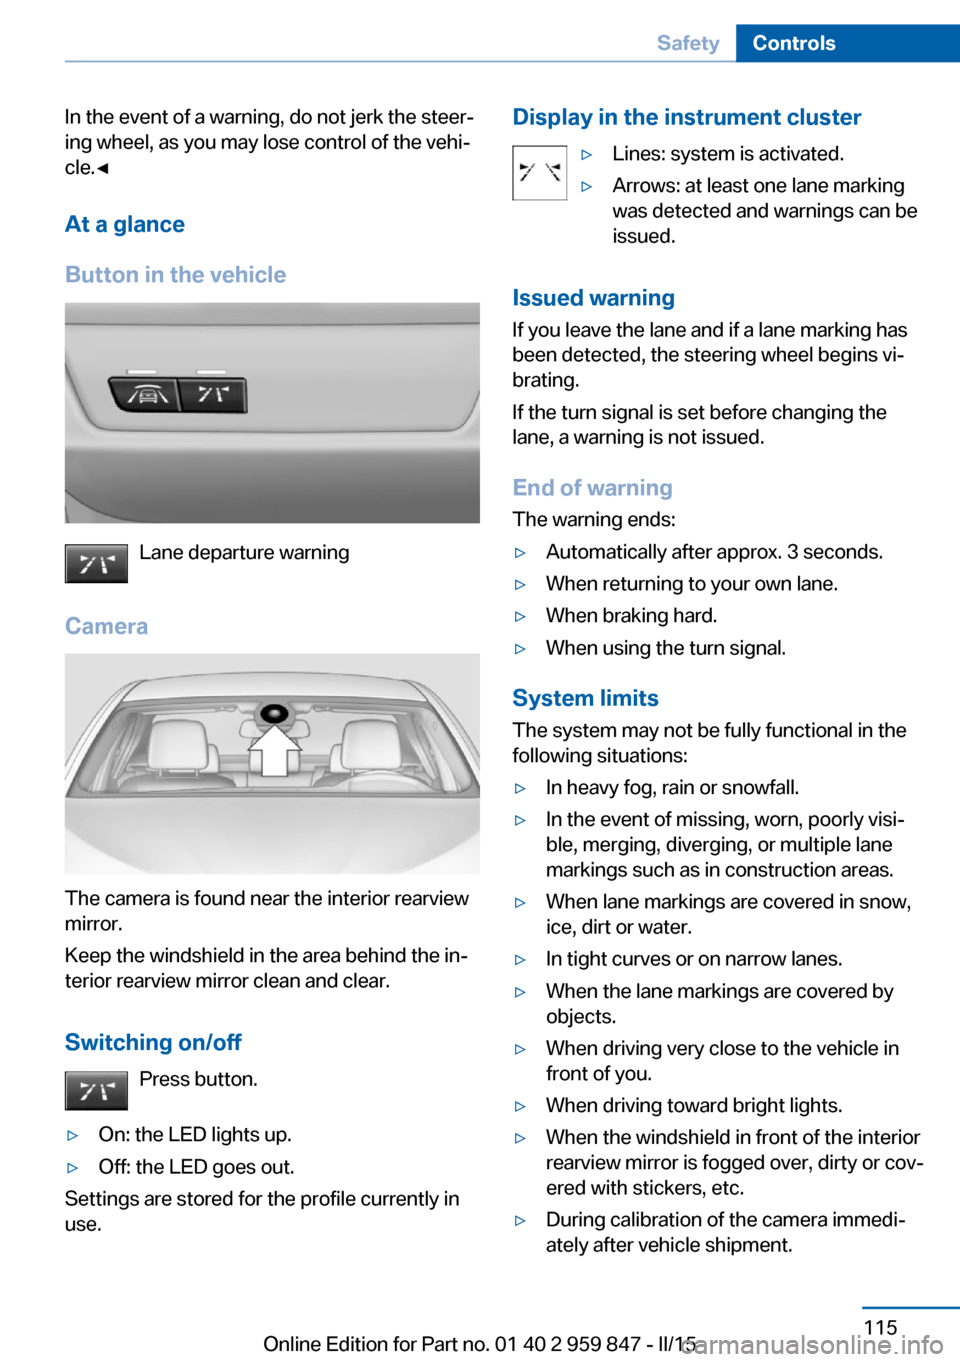 BMW 2 SERIES CONVERTIBLE 2015 F23 Owners Guide In the event of a warning, do not jerk the steer‐
ing wheel, as you may lose control of the vehi‐
cle.◀
At a glance
Button in the vehicle
Lane departure warning
Camera
The camera is found near t